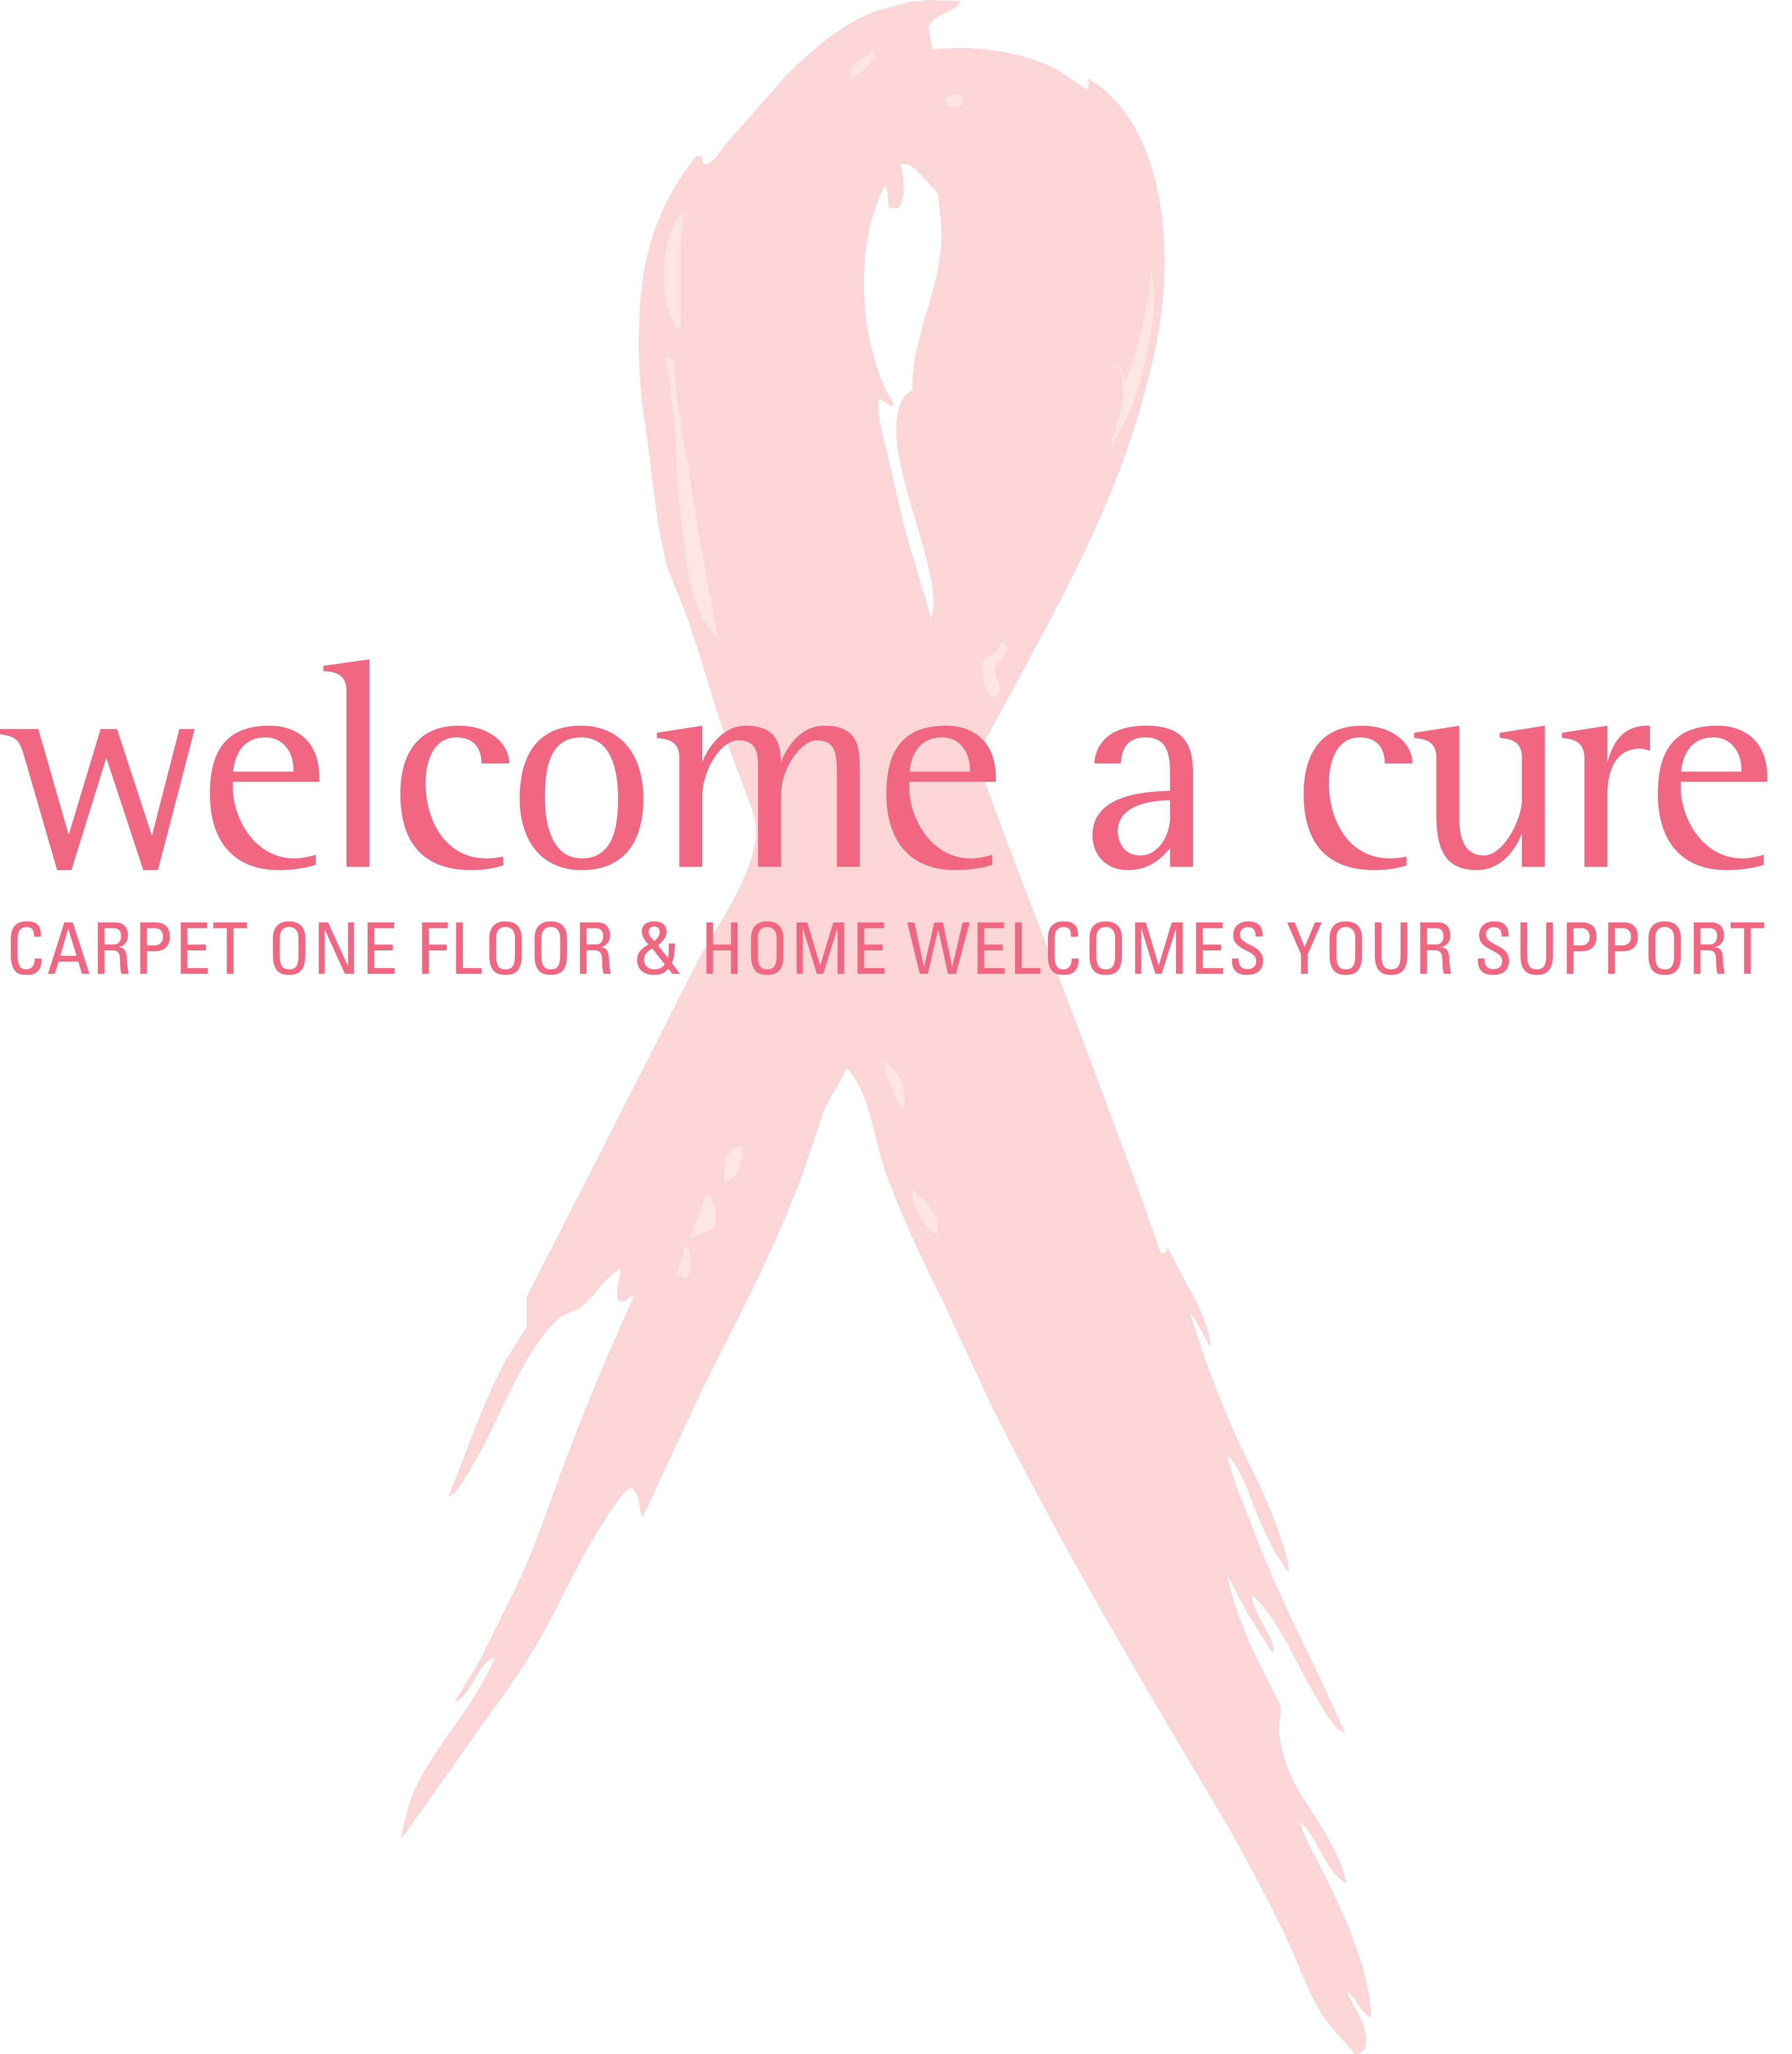 welcome a cure